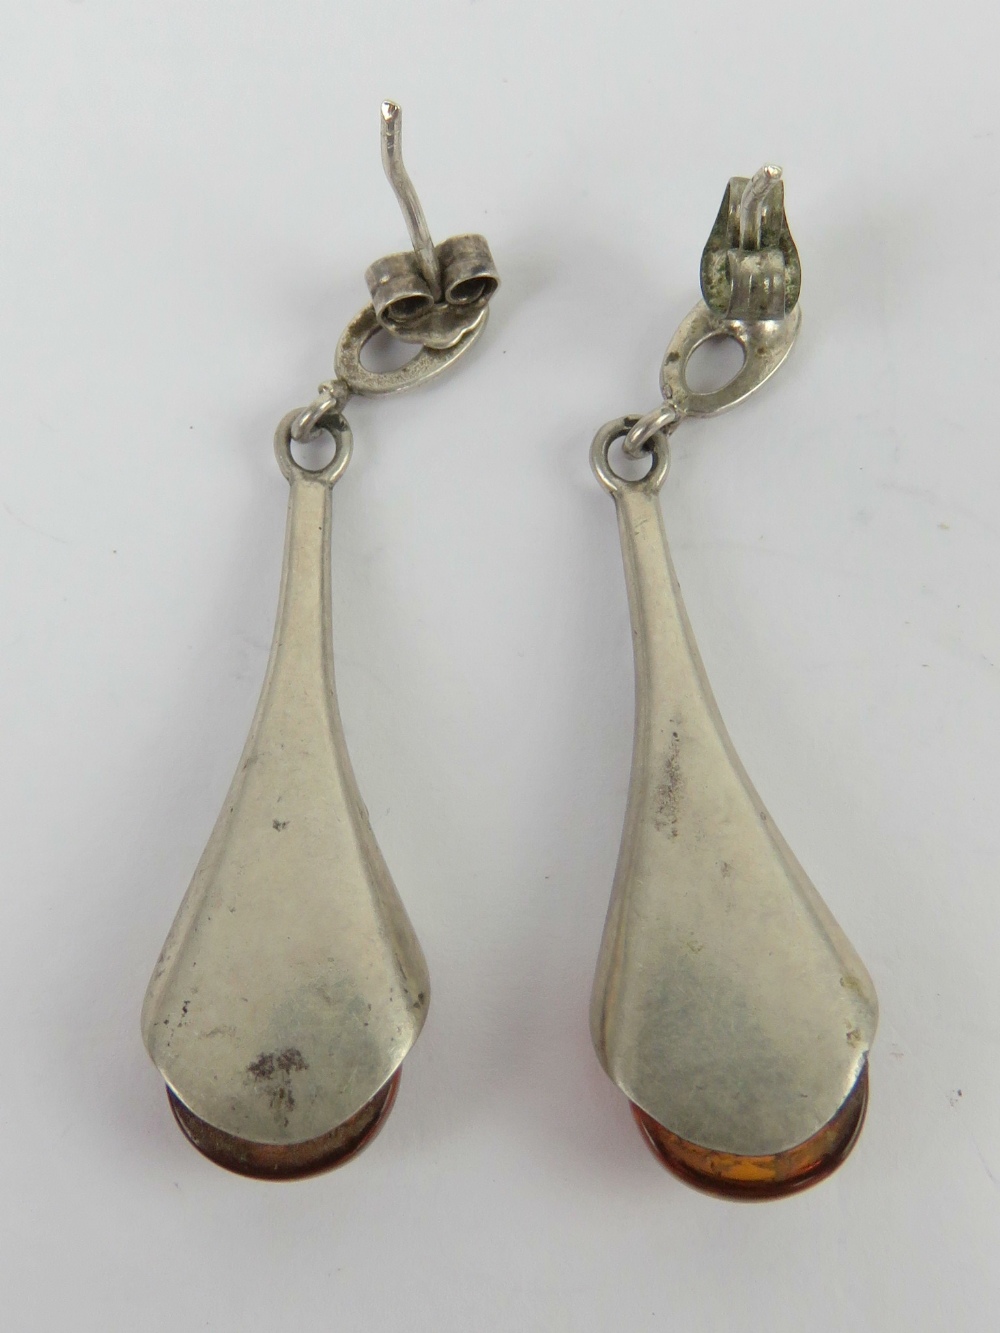 A pair of silver and Baltic amber earrings in the Art Nouveau style, stamped 925, 4.5cm drop. - Image 2 of 2